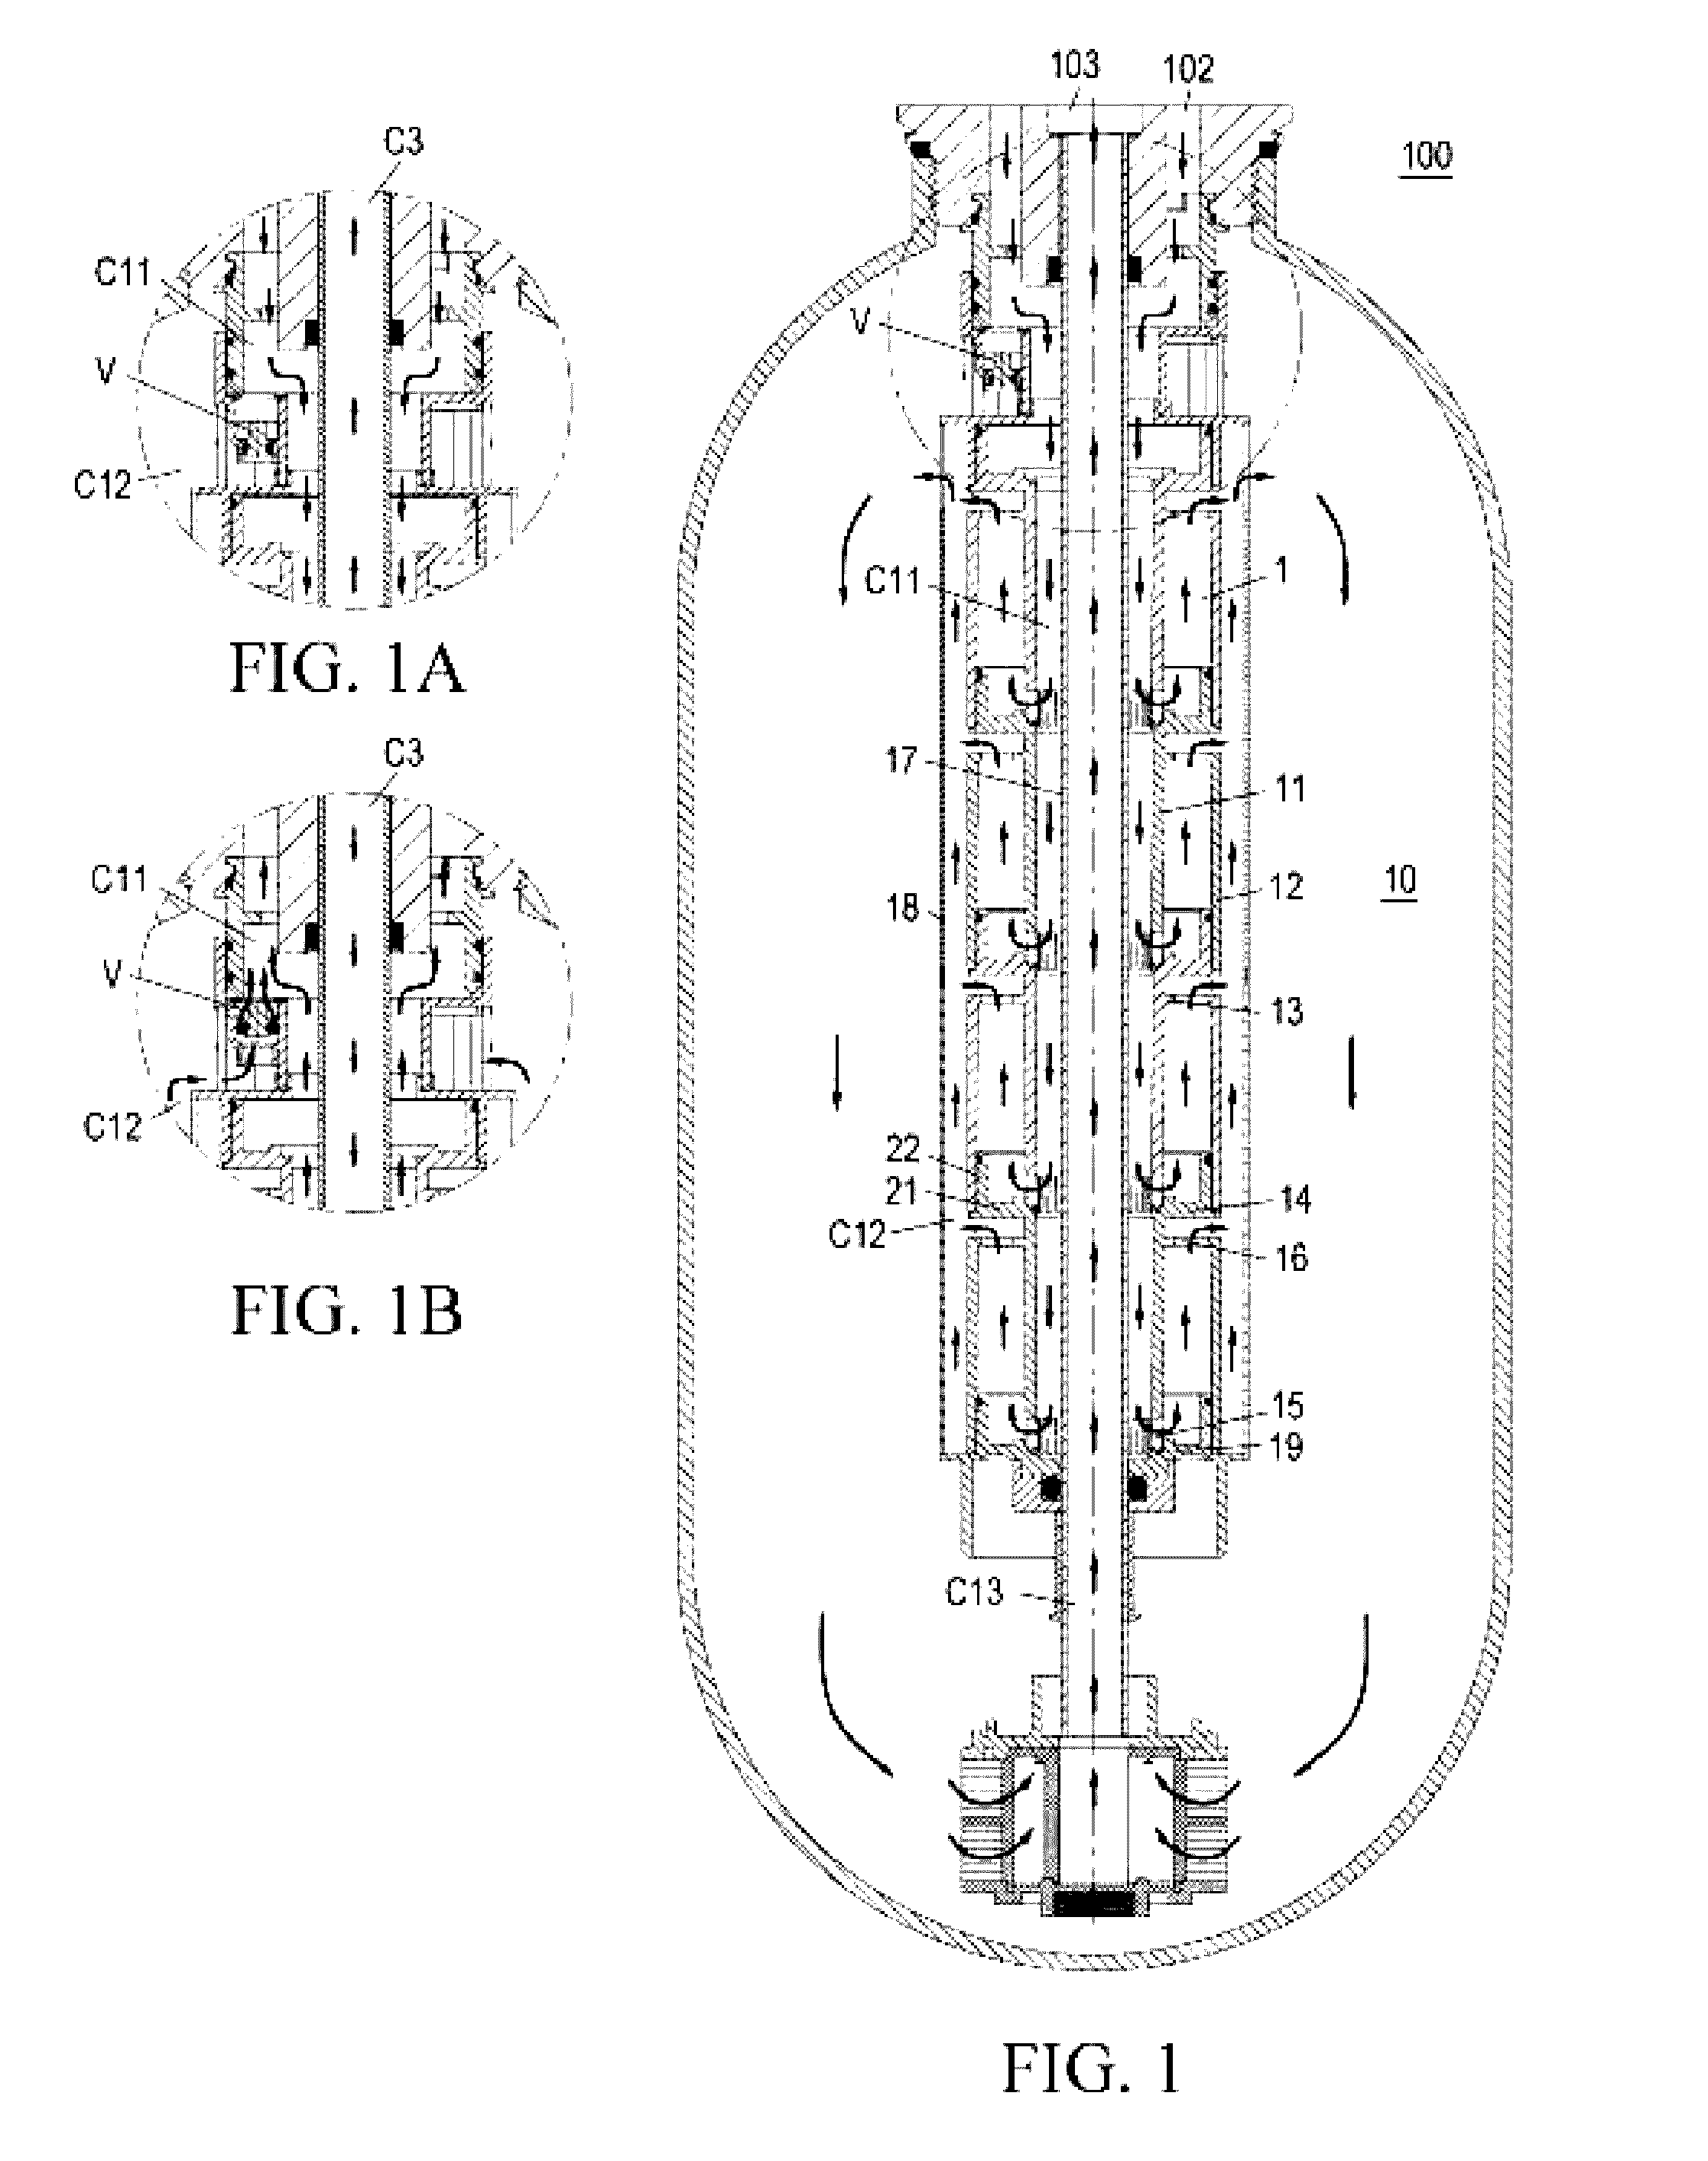 Unit, assembly and apparatus for treating fluid